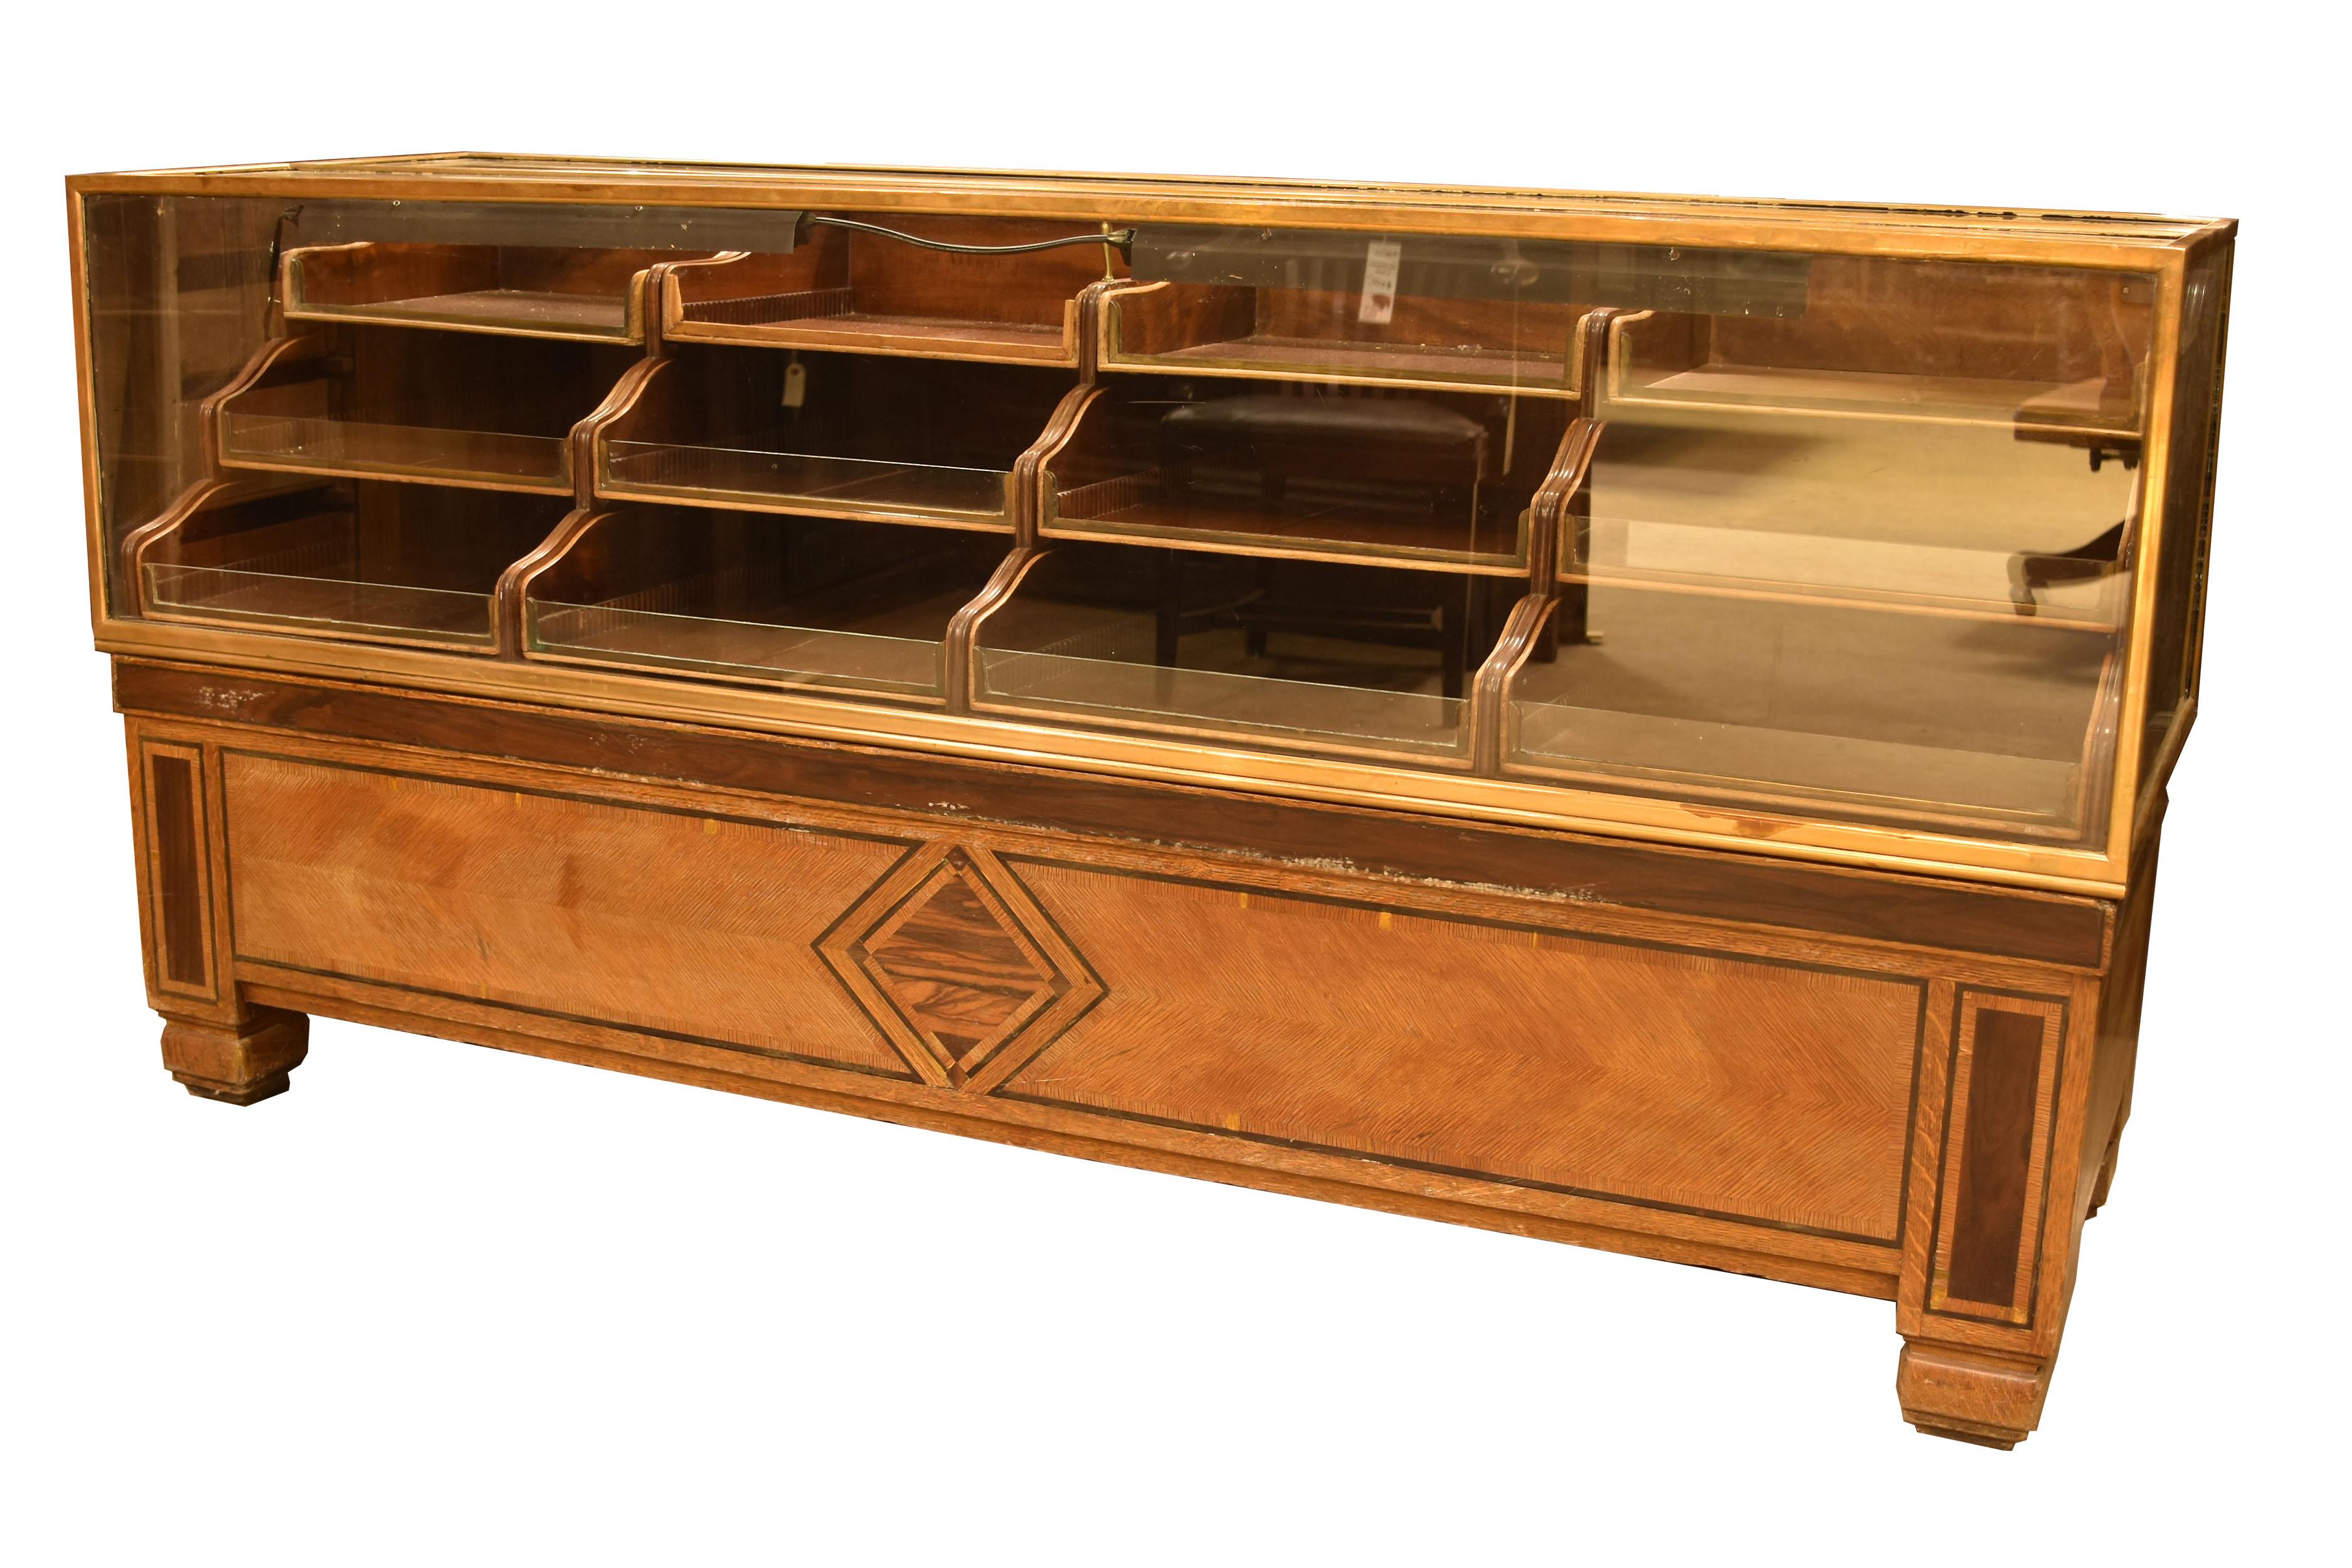 Deco Inlaid Mercantile Display Case with Shelves 2